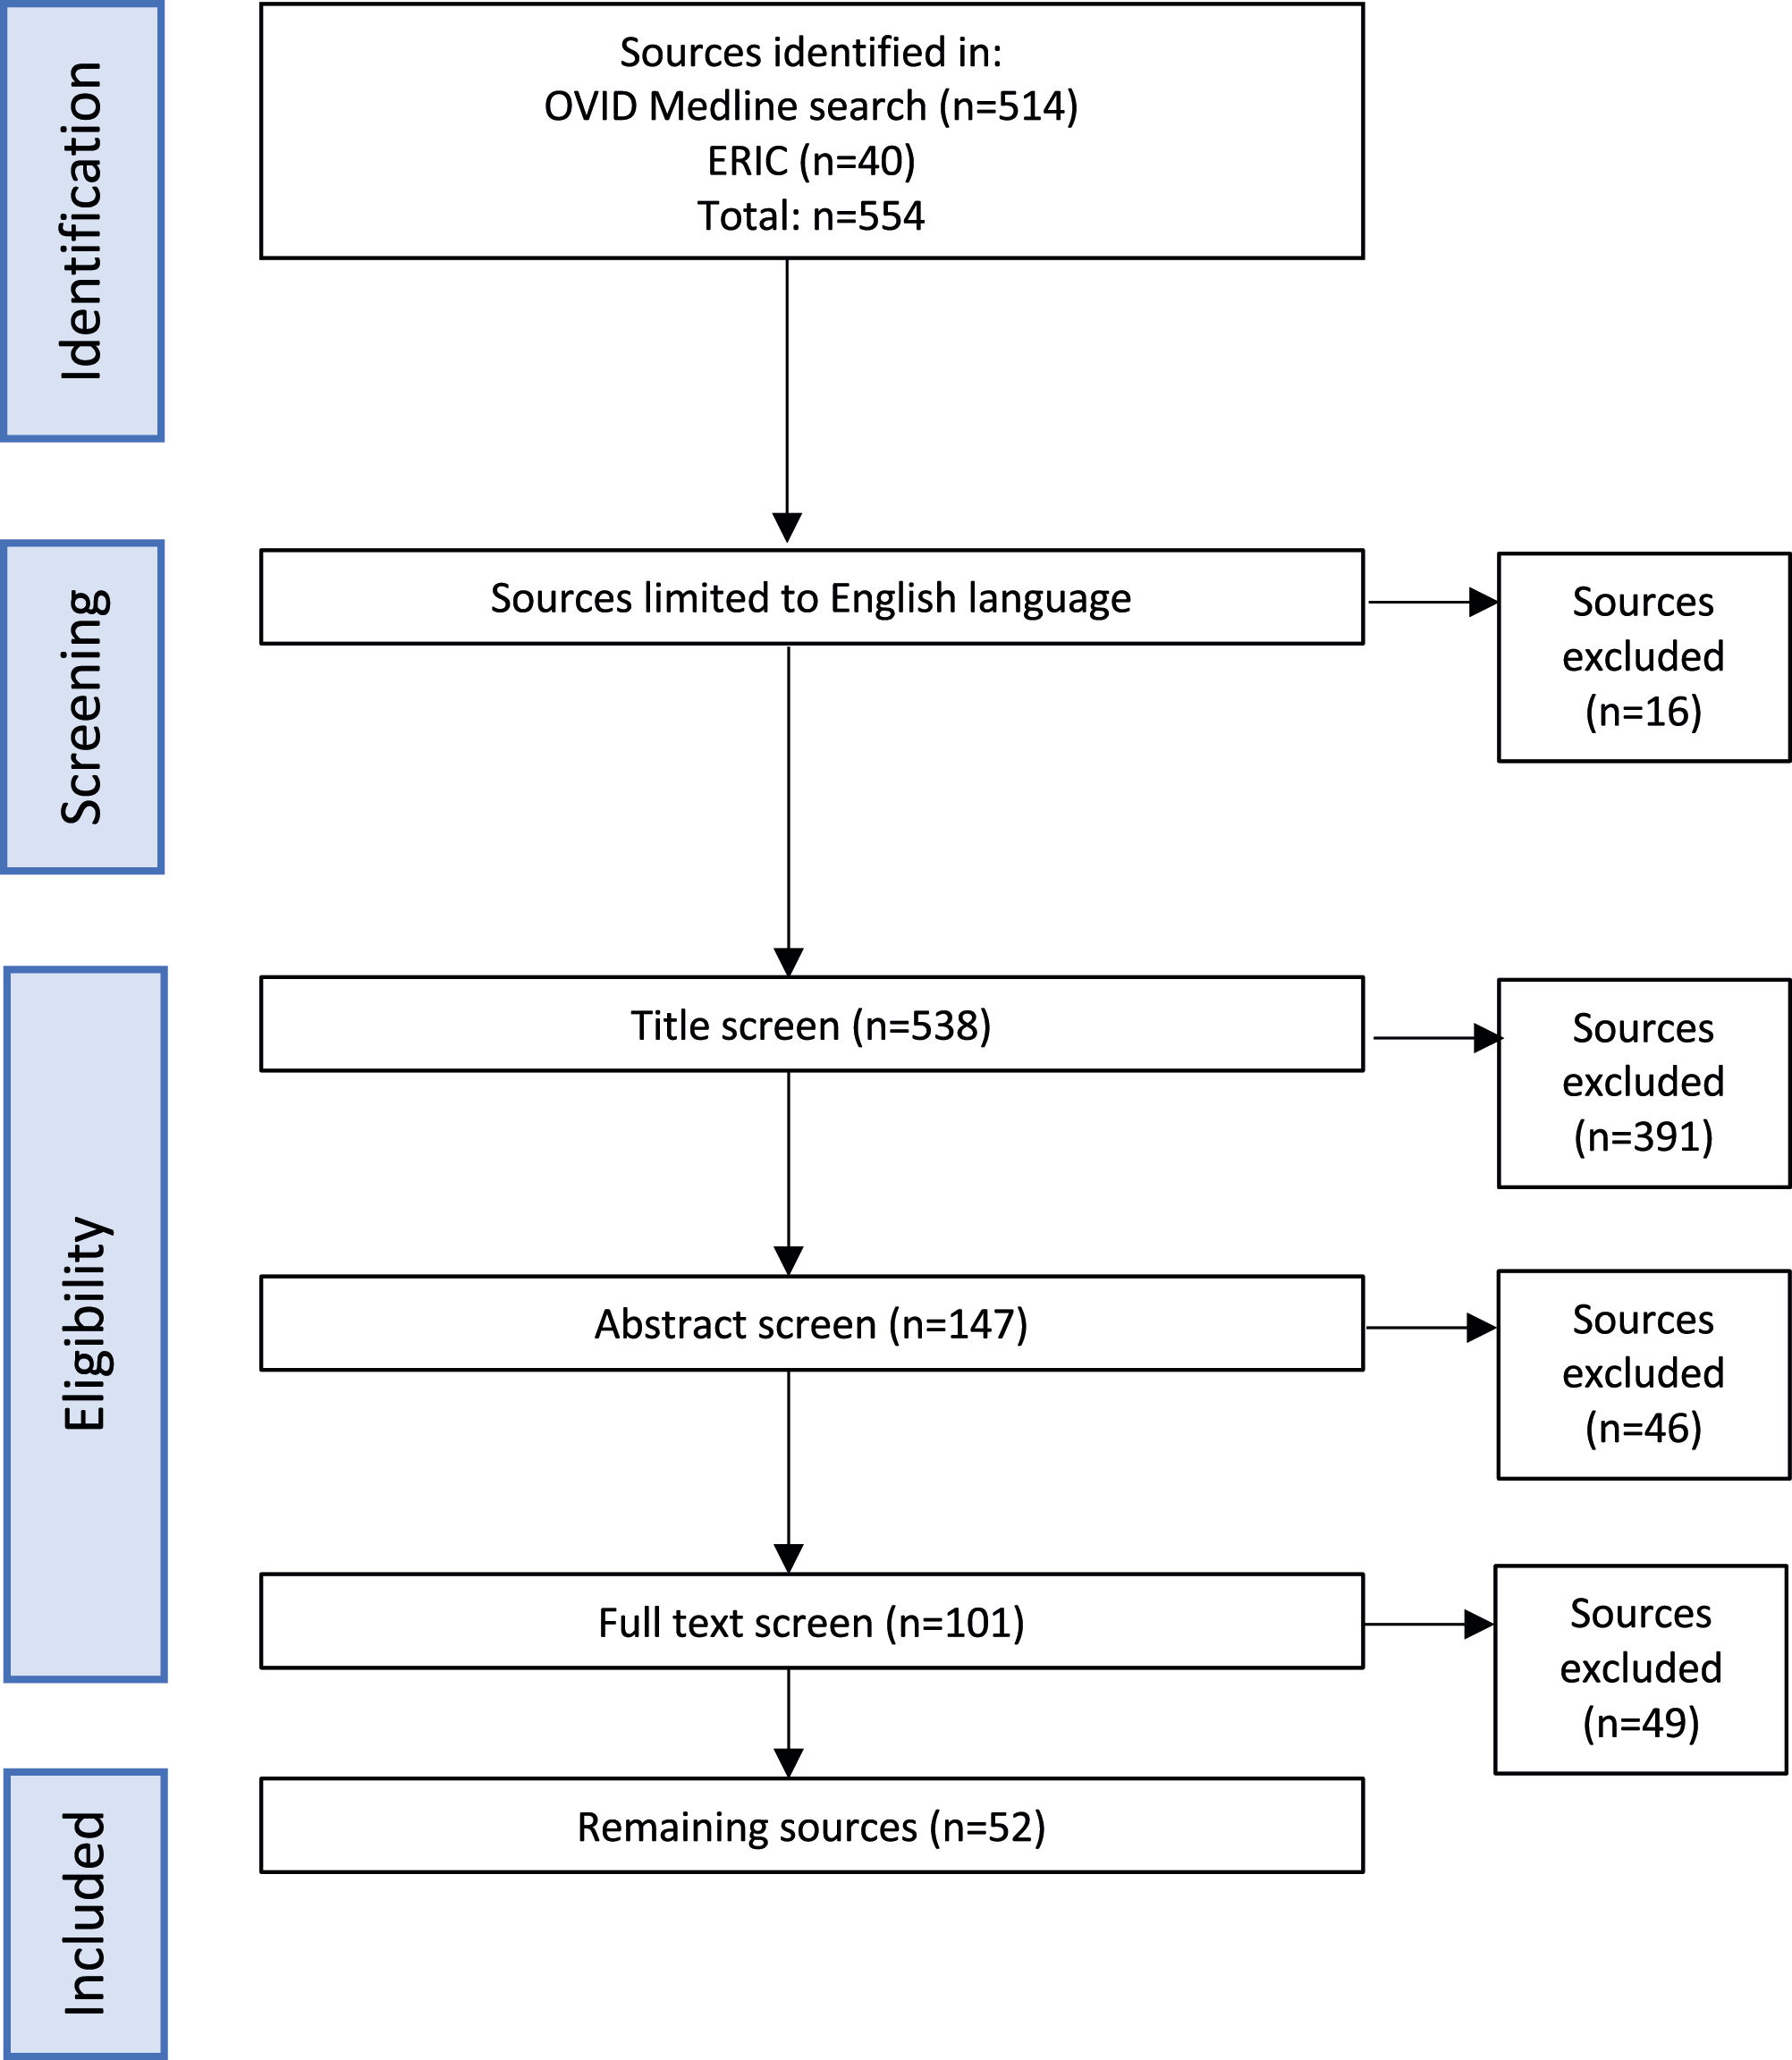 PRISMA flow diagram (adapted from Moher et al [13]) of the literature search (conducted on 28 May 2021) and study selection process for this scoping review on simulation in plastic and reconstructive surgery.